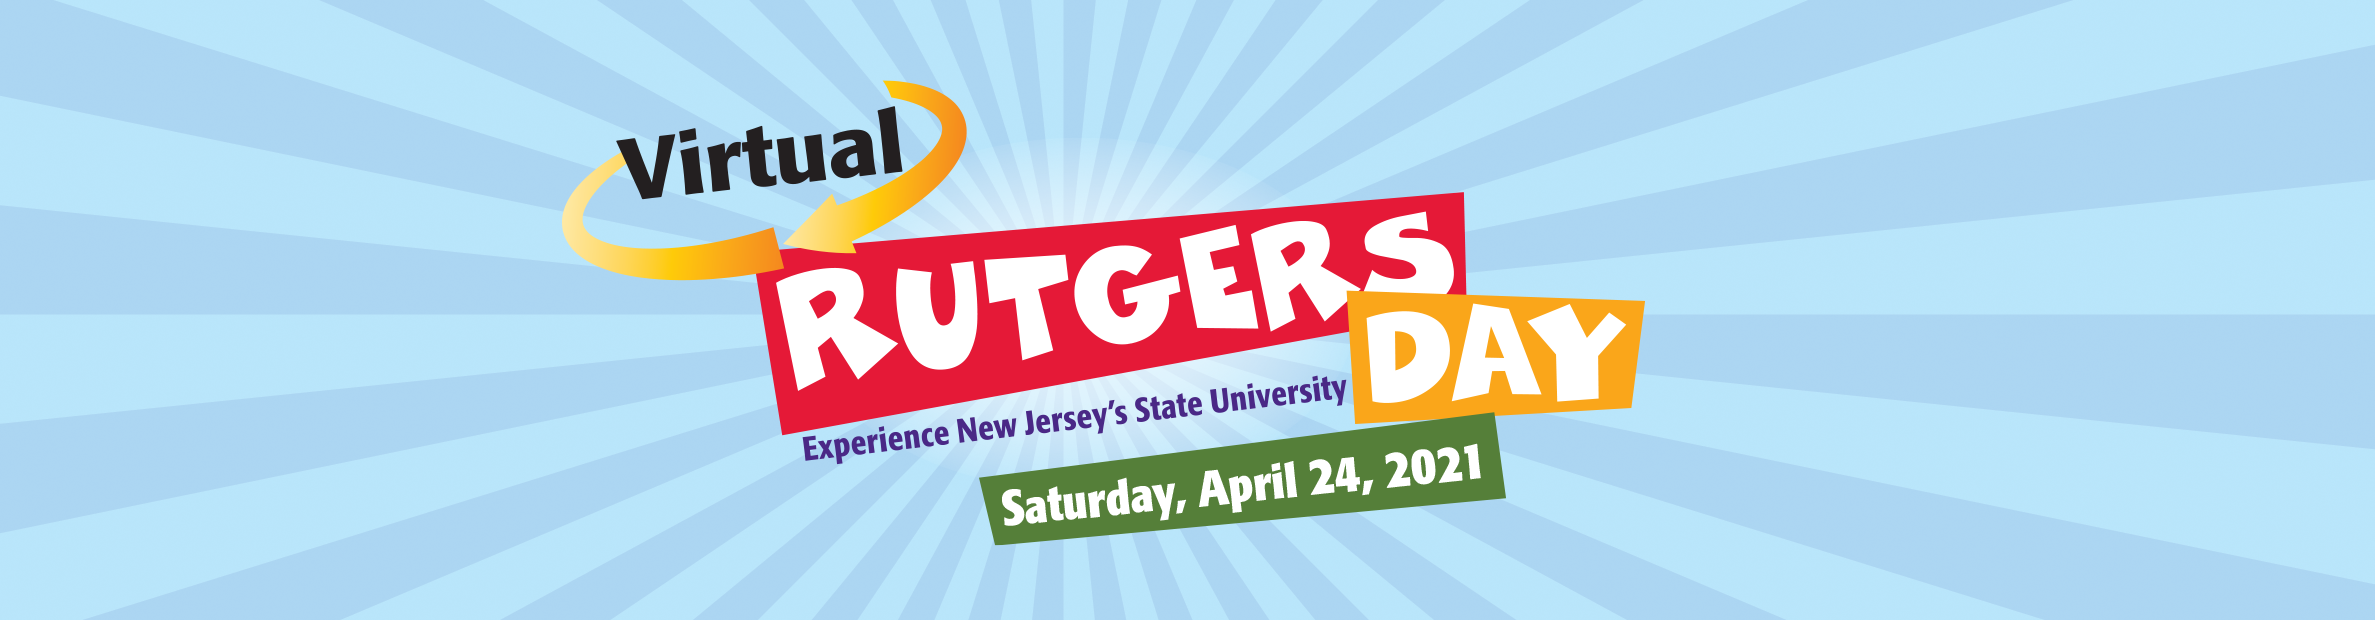 image of Rutgers Day save the date